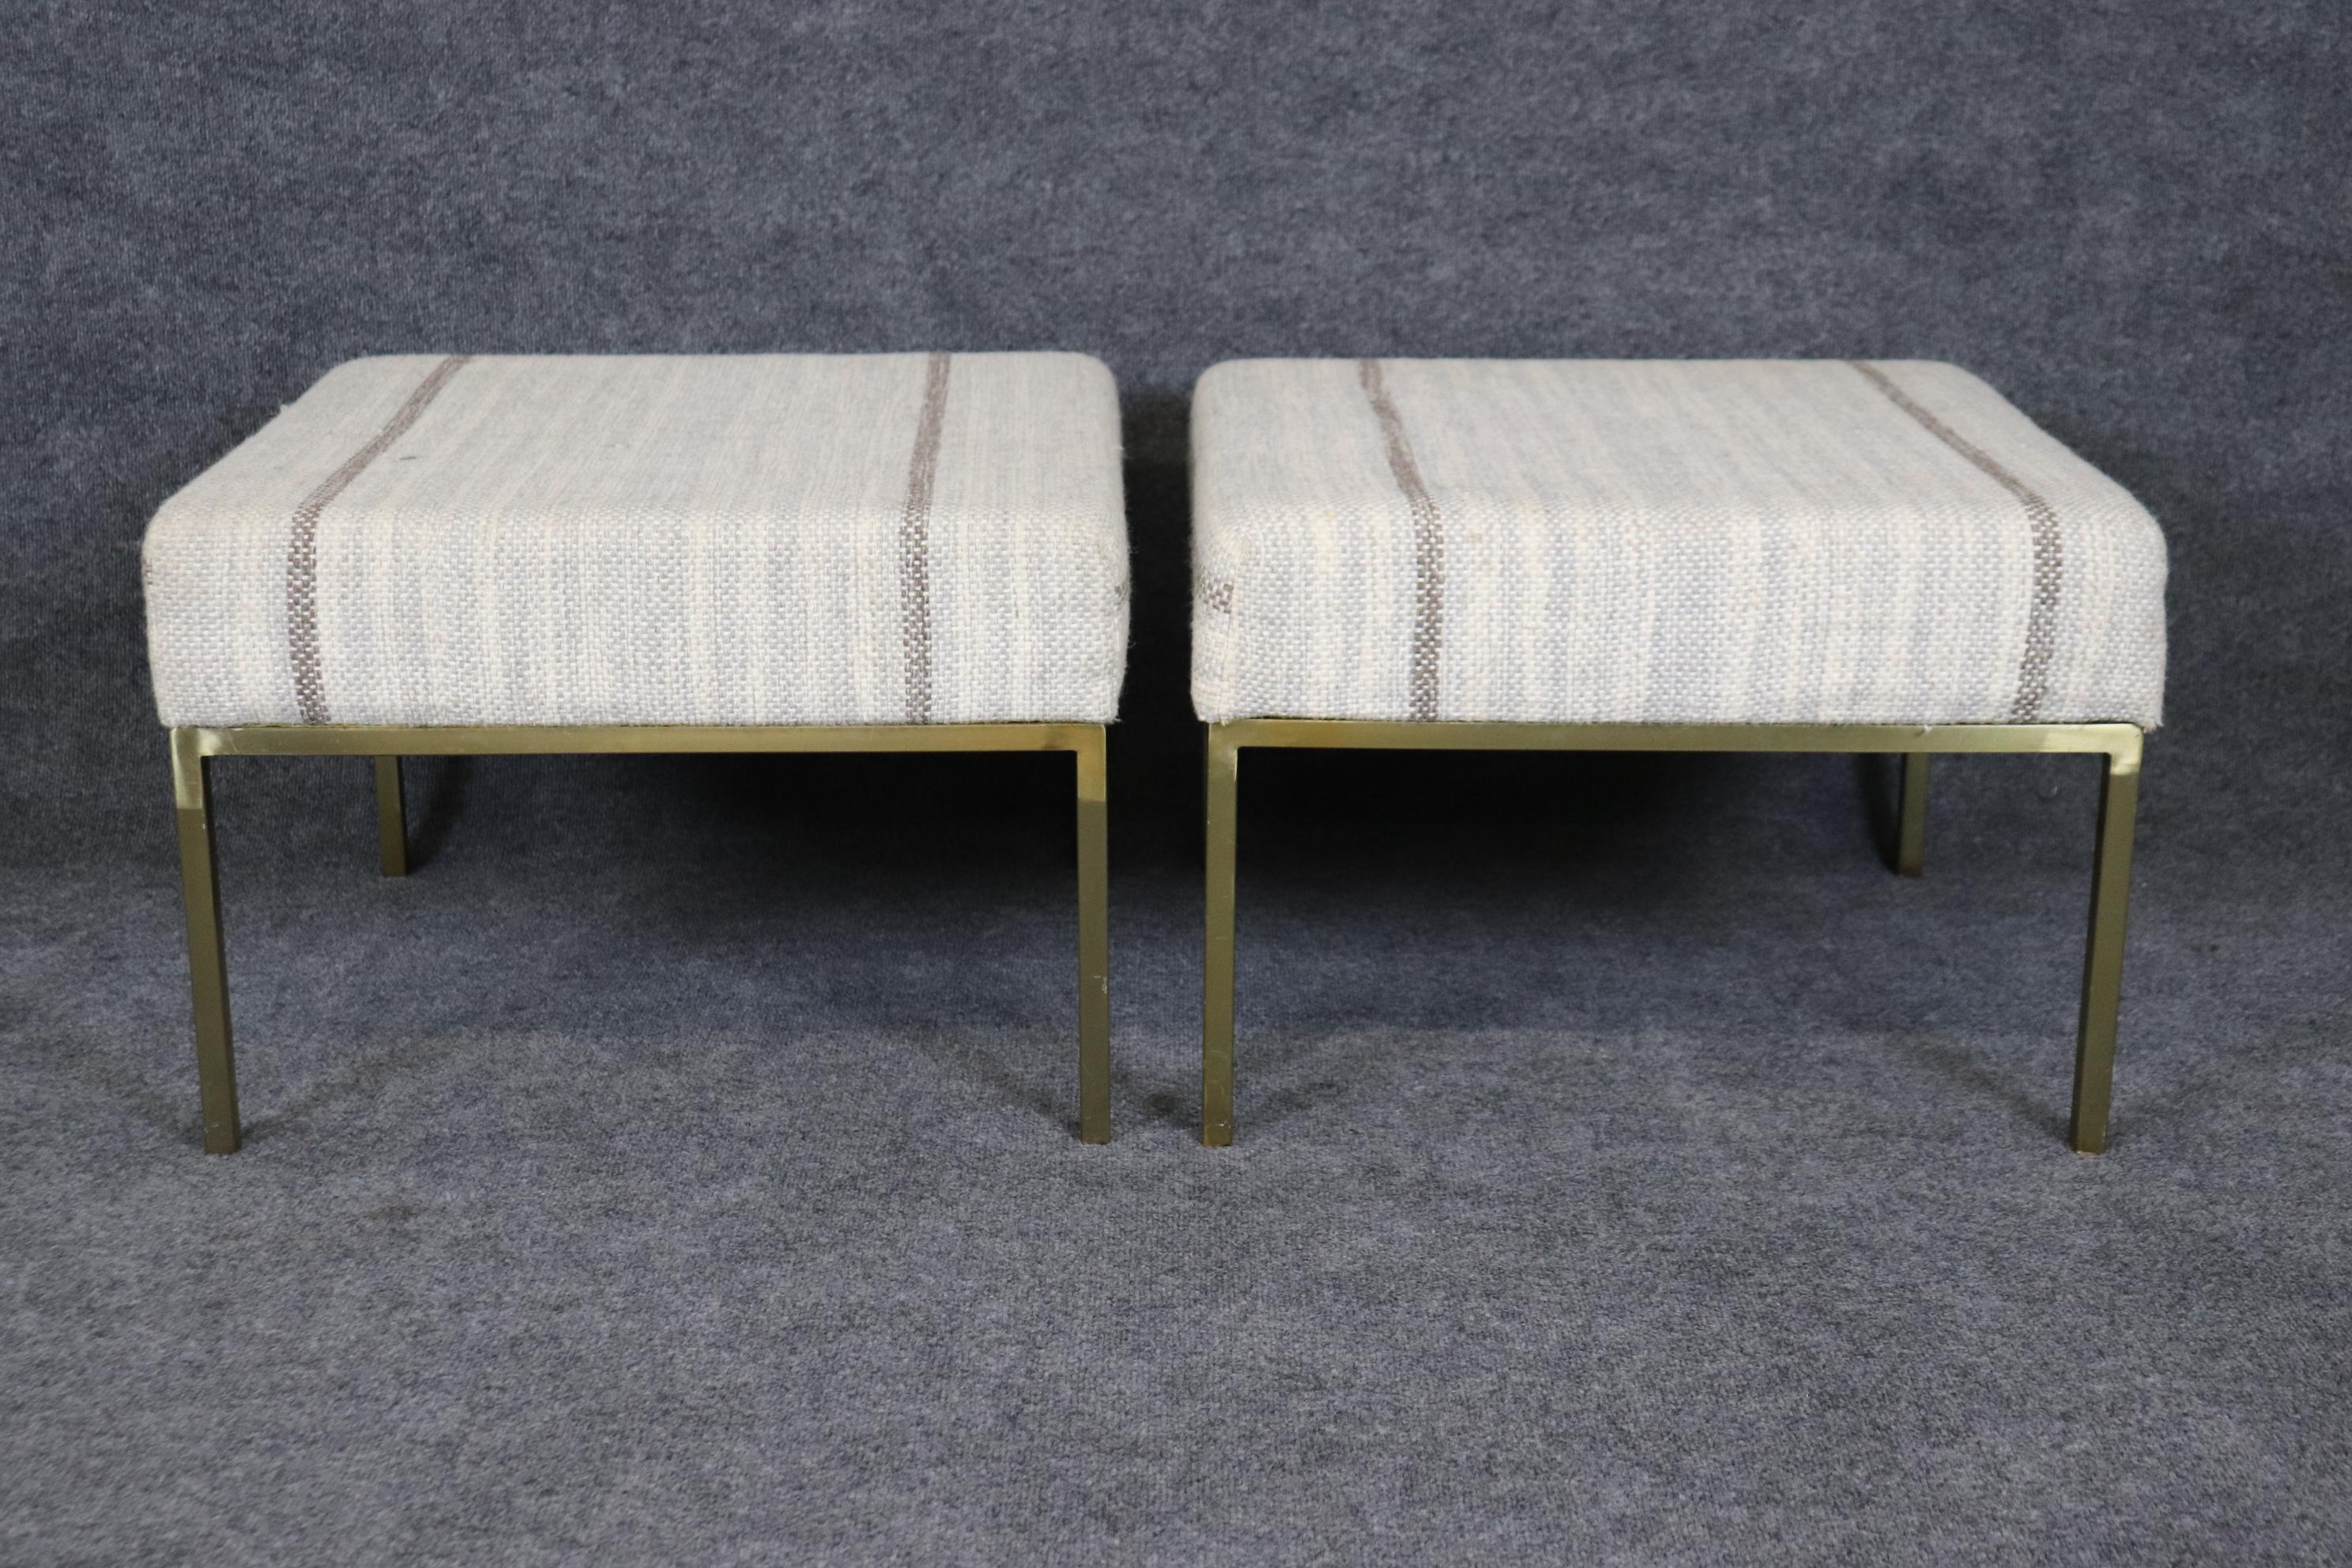 This is a fine pair of brass square mid century modern stools in the style of Paul McCobb for Planner Group. They don't have the x stretcher that most McCobb stools have and more closely resemmble Planner Group by Paul McCobb but I can't find any in